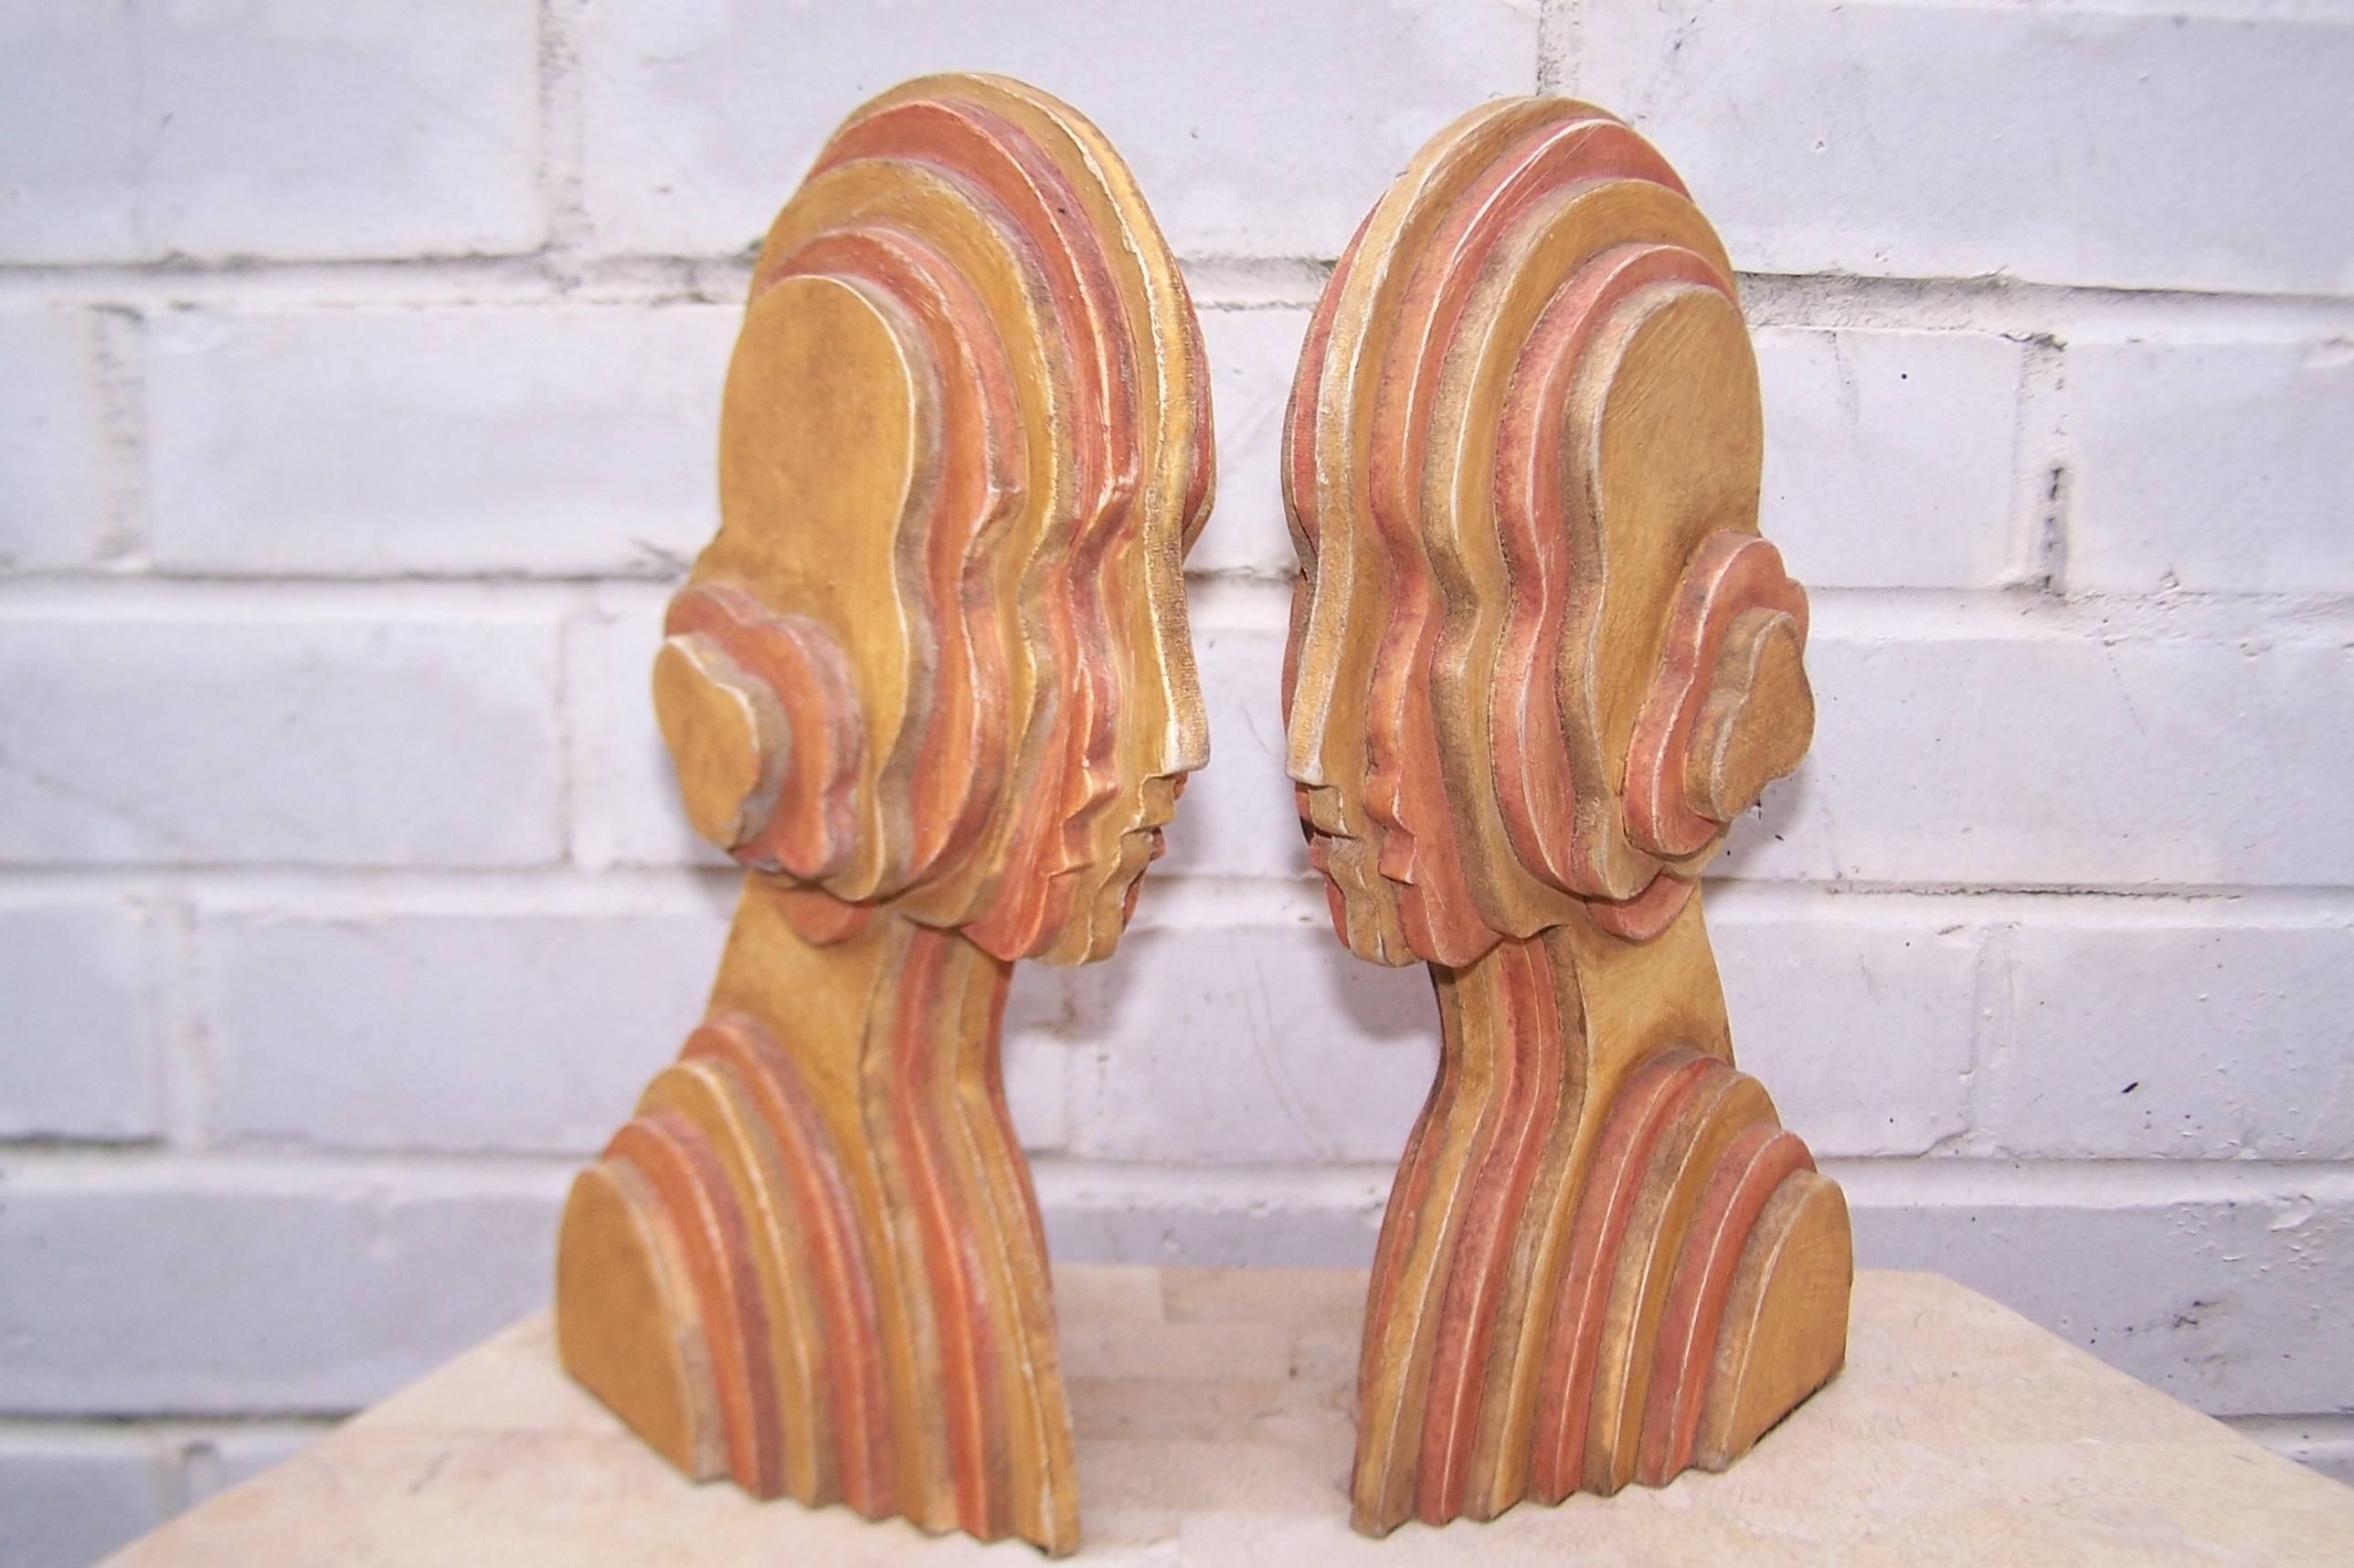 Brown Circa 1970 Art Deco Flapper Inspired Wooden Bookends